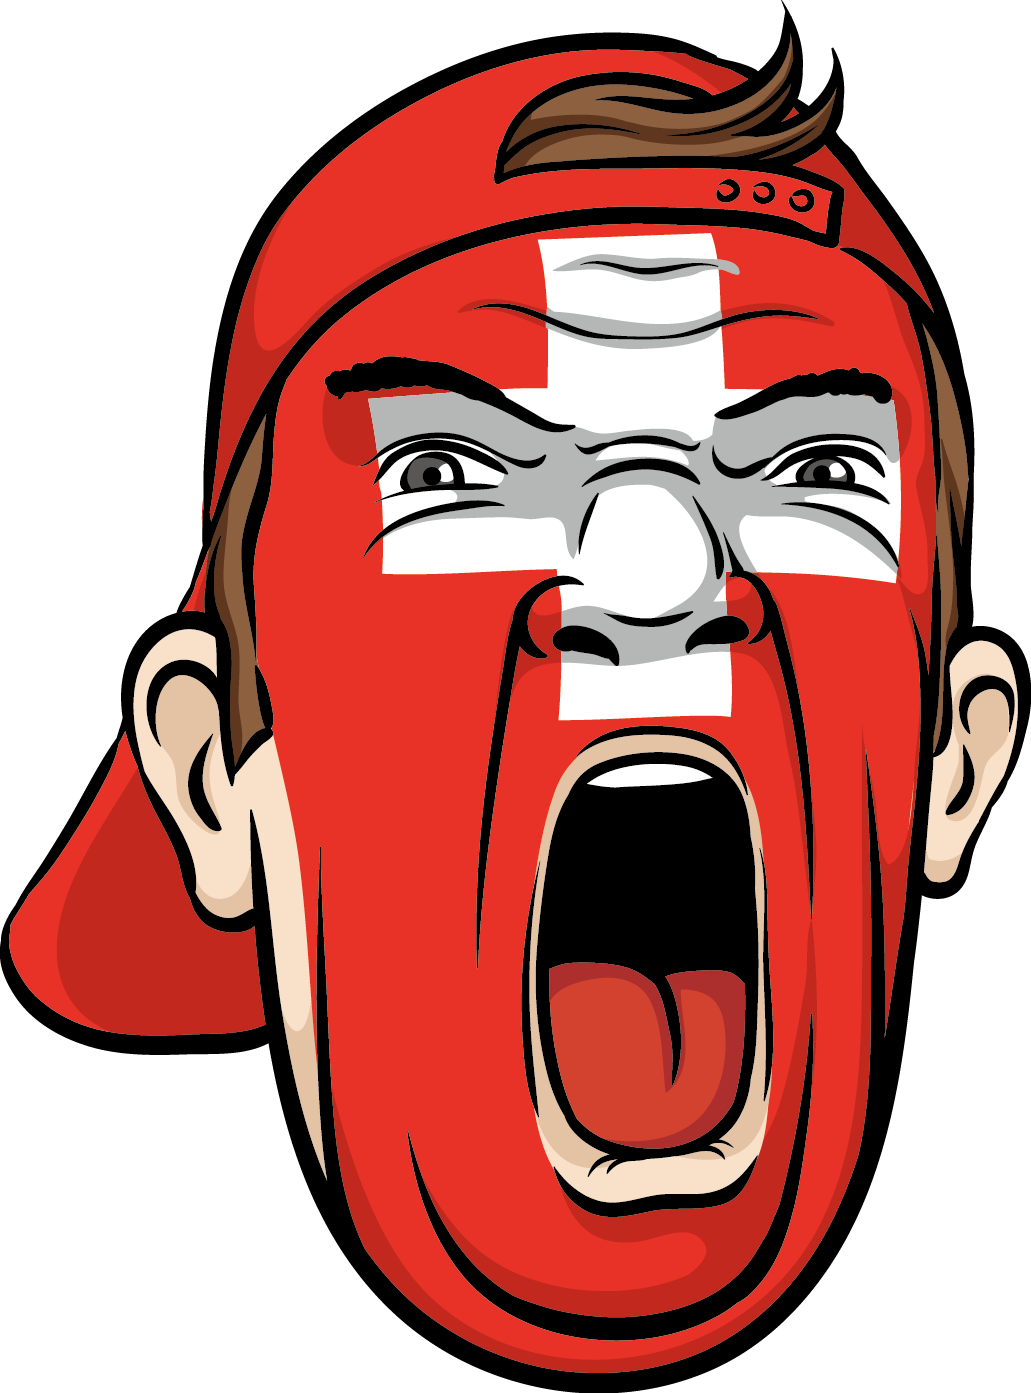 Yelling Swiss Face PNG Image